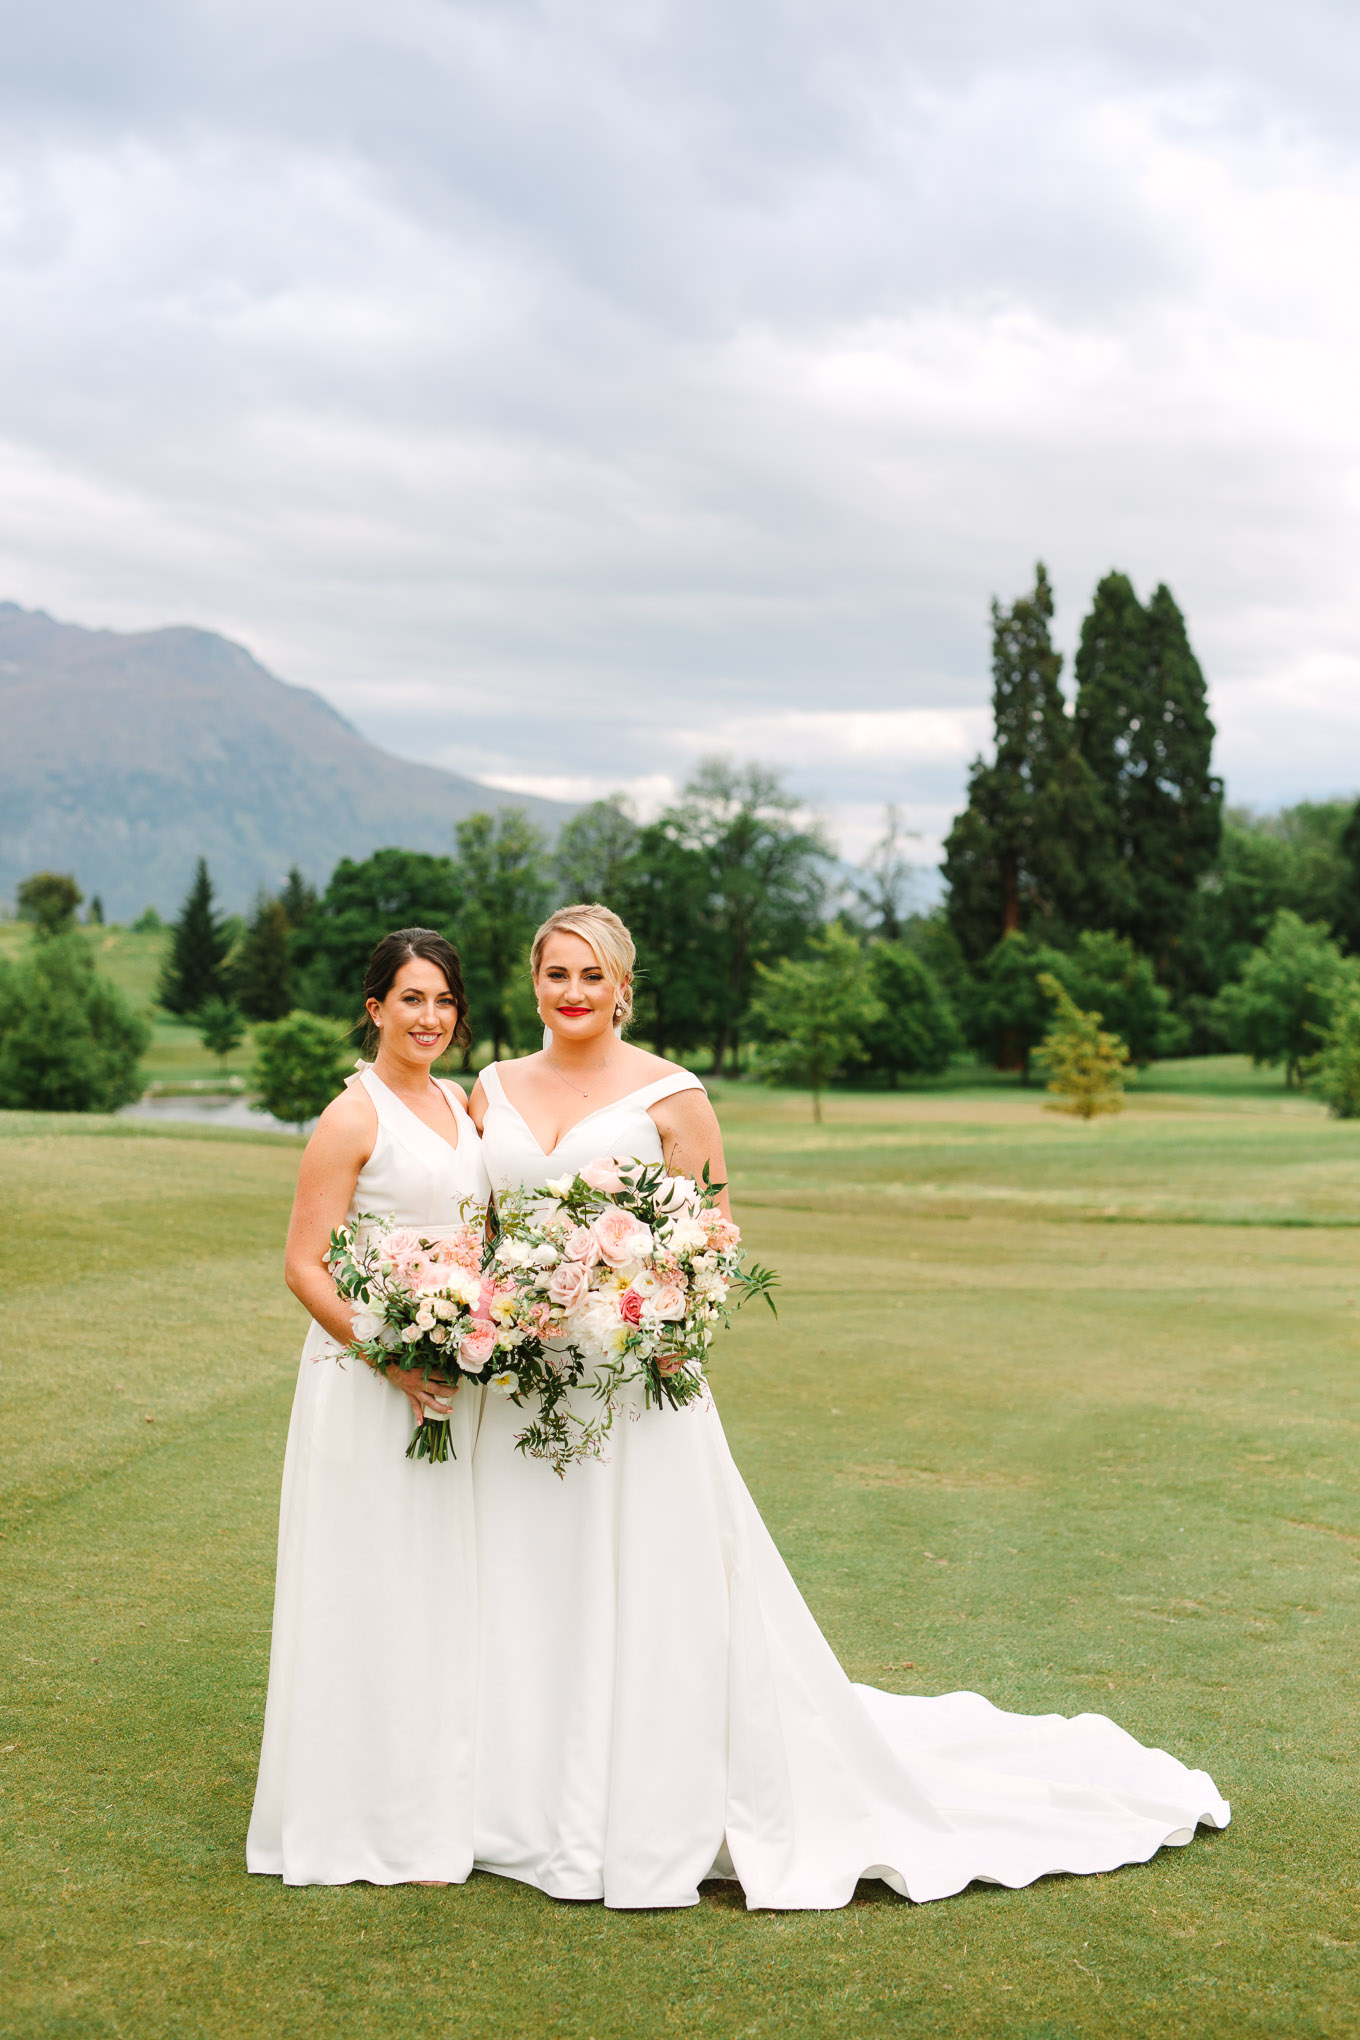 Bride and matron of honor, both in all white. Millbrook Resort Queenstown New Zealand wedding by Mary Costa Photography | www.marycostaweddings.com